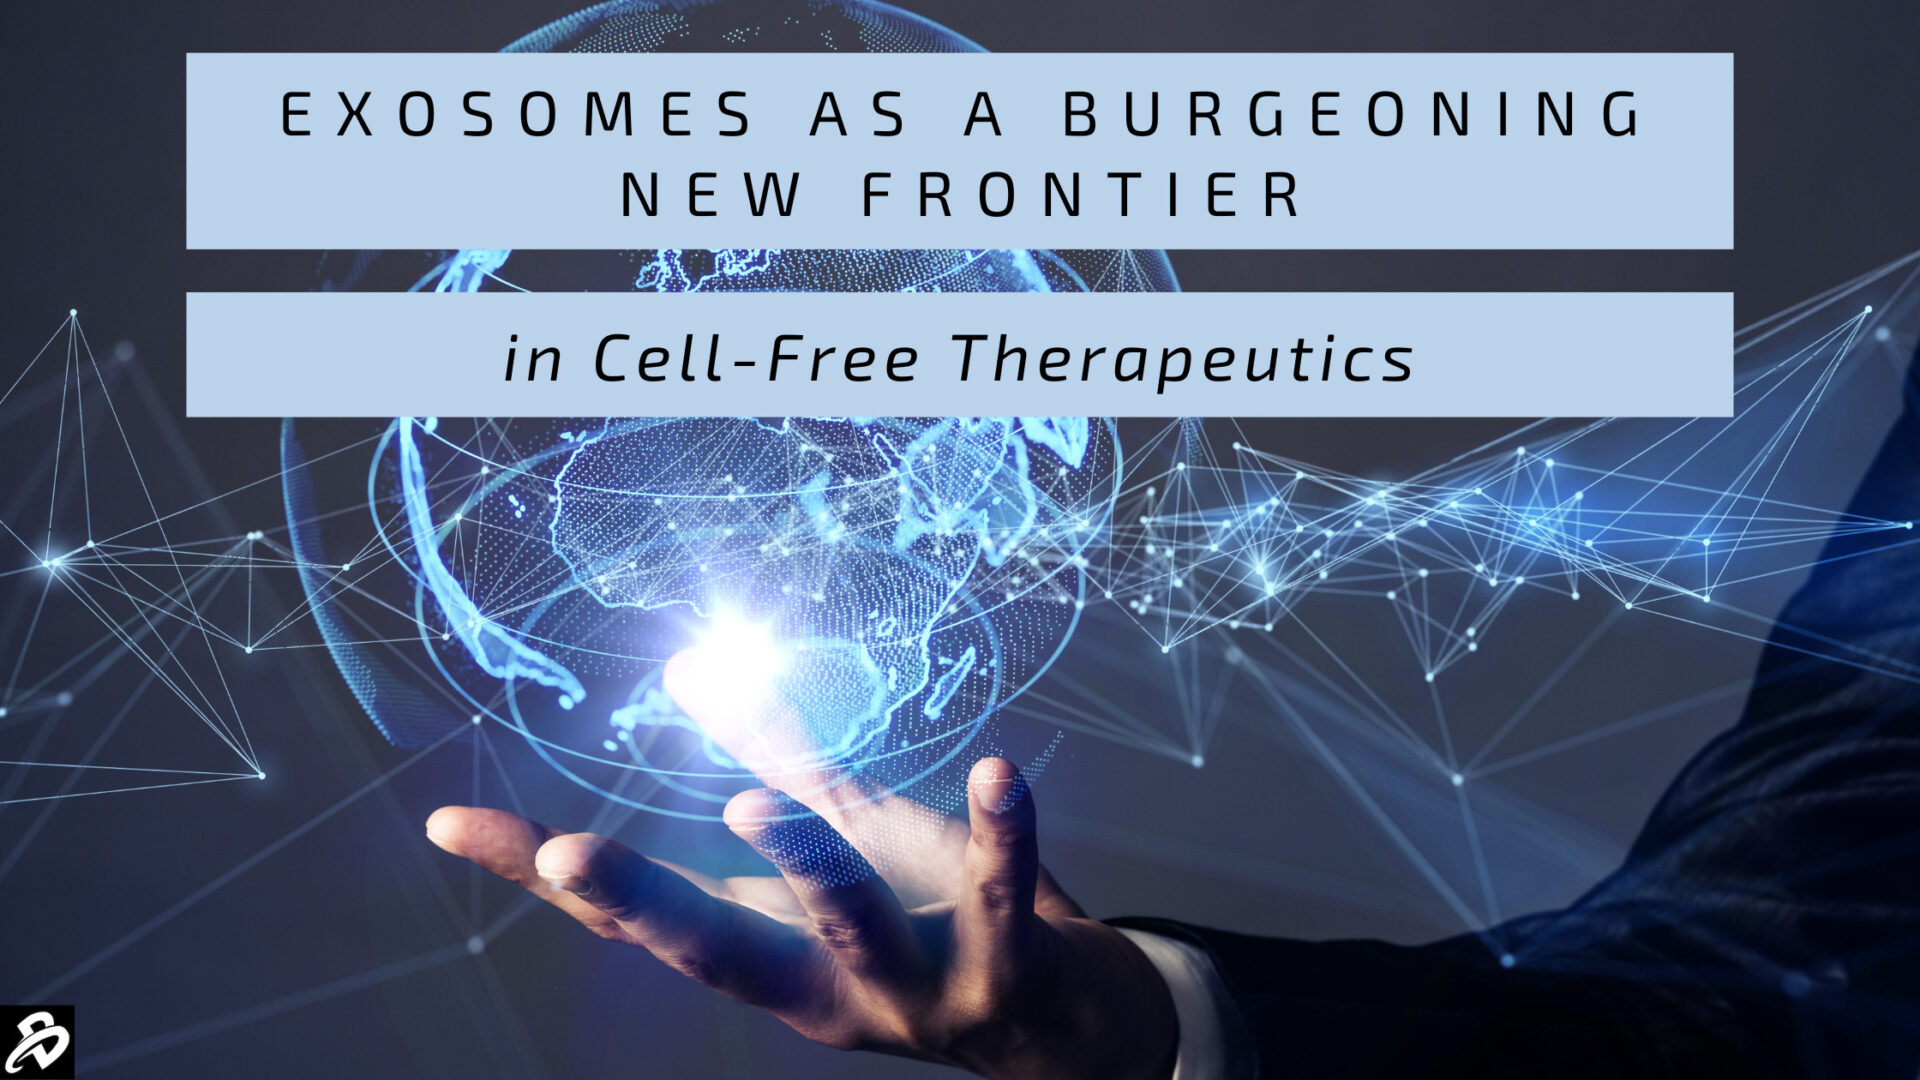 Exosomes as cell-free therapeutics